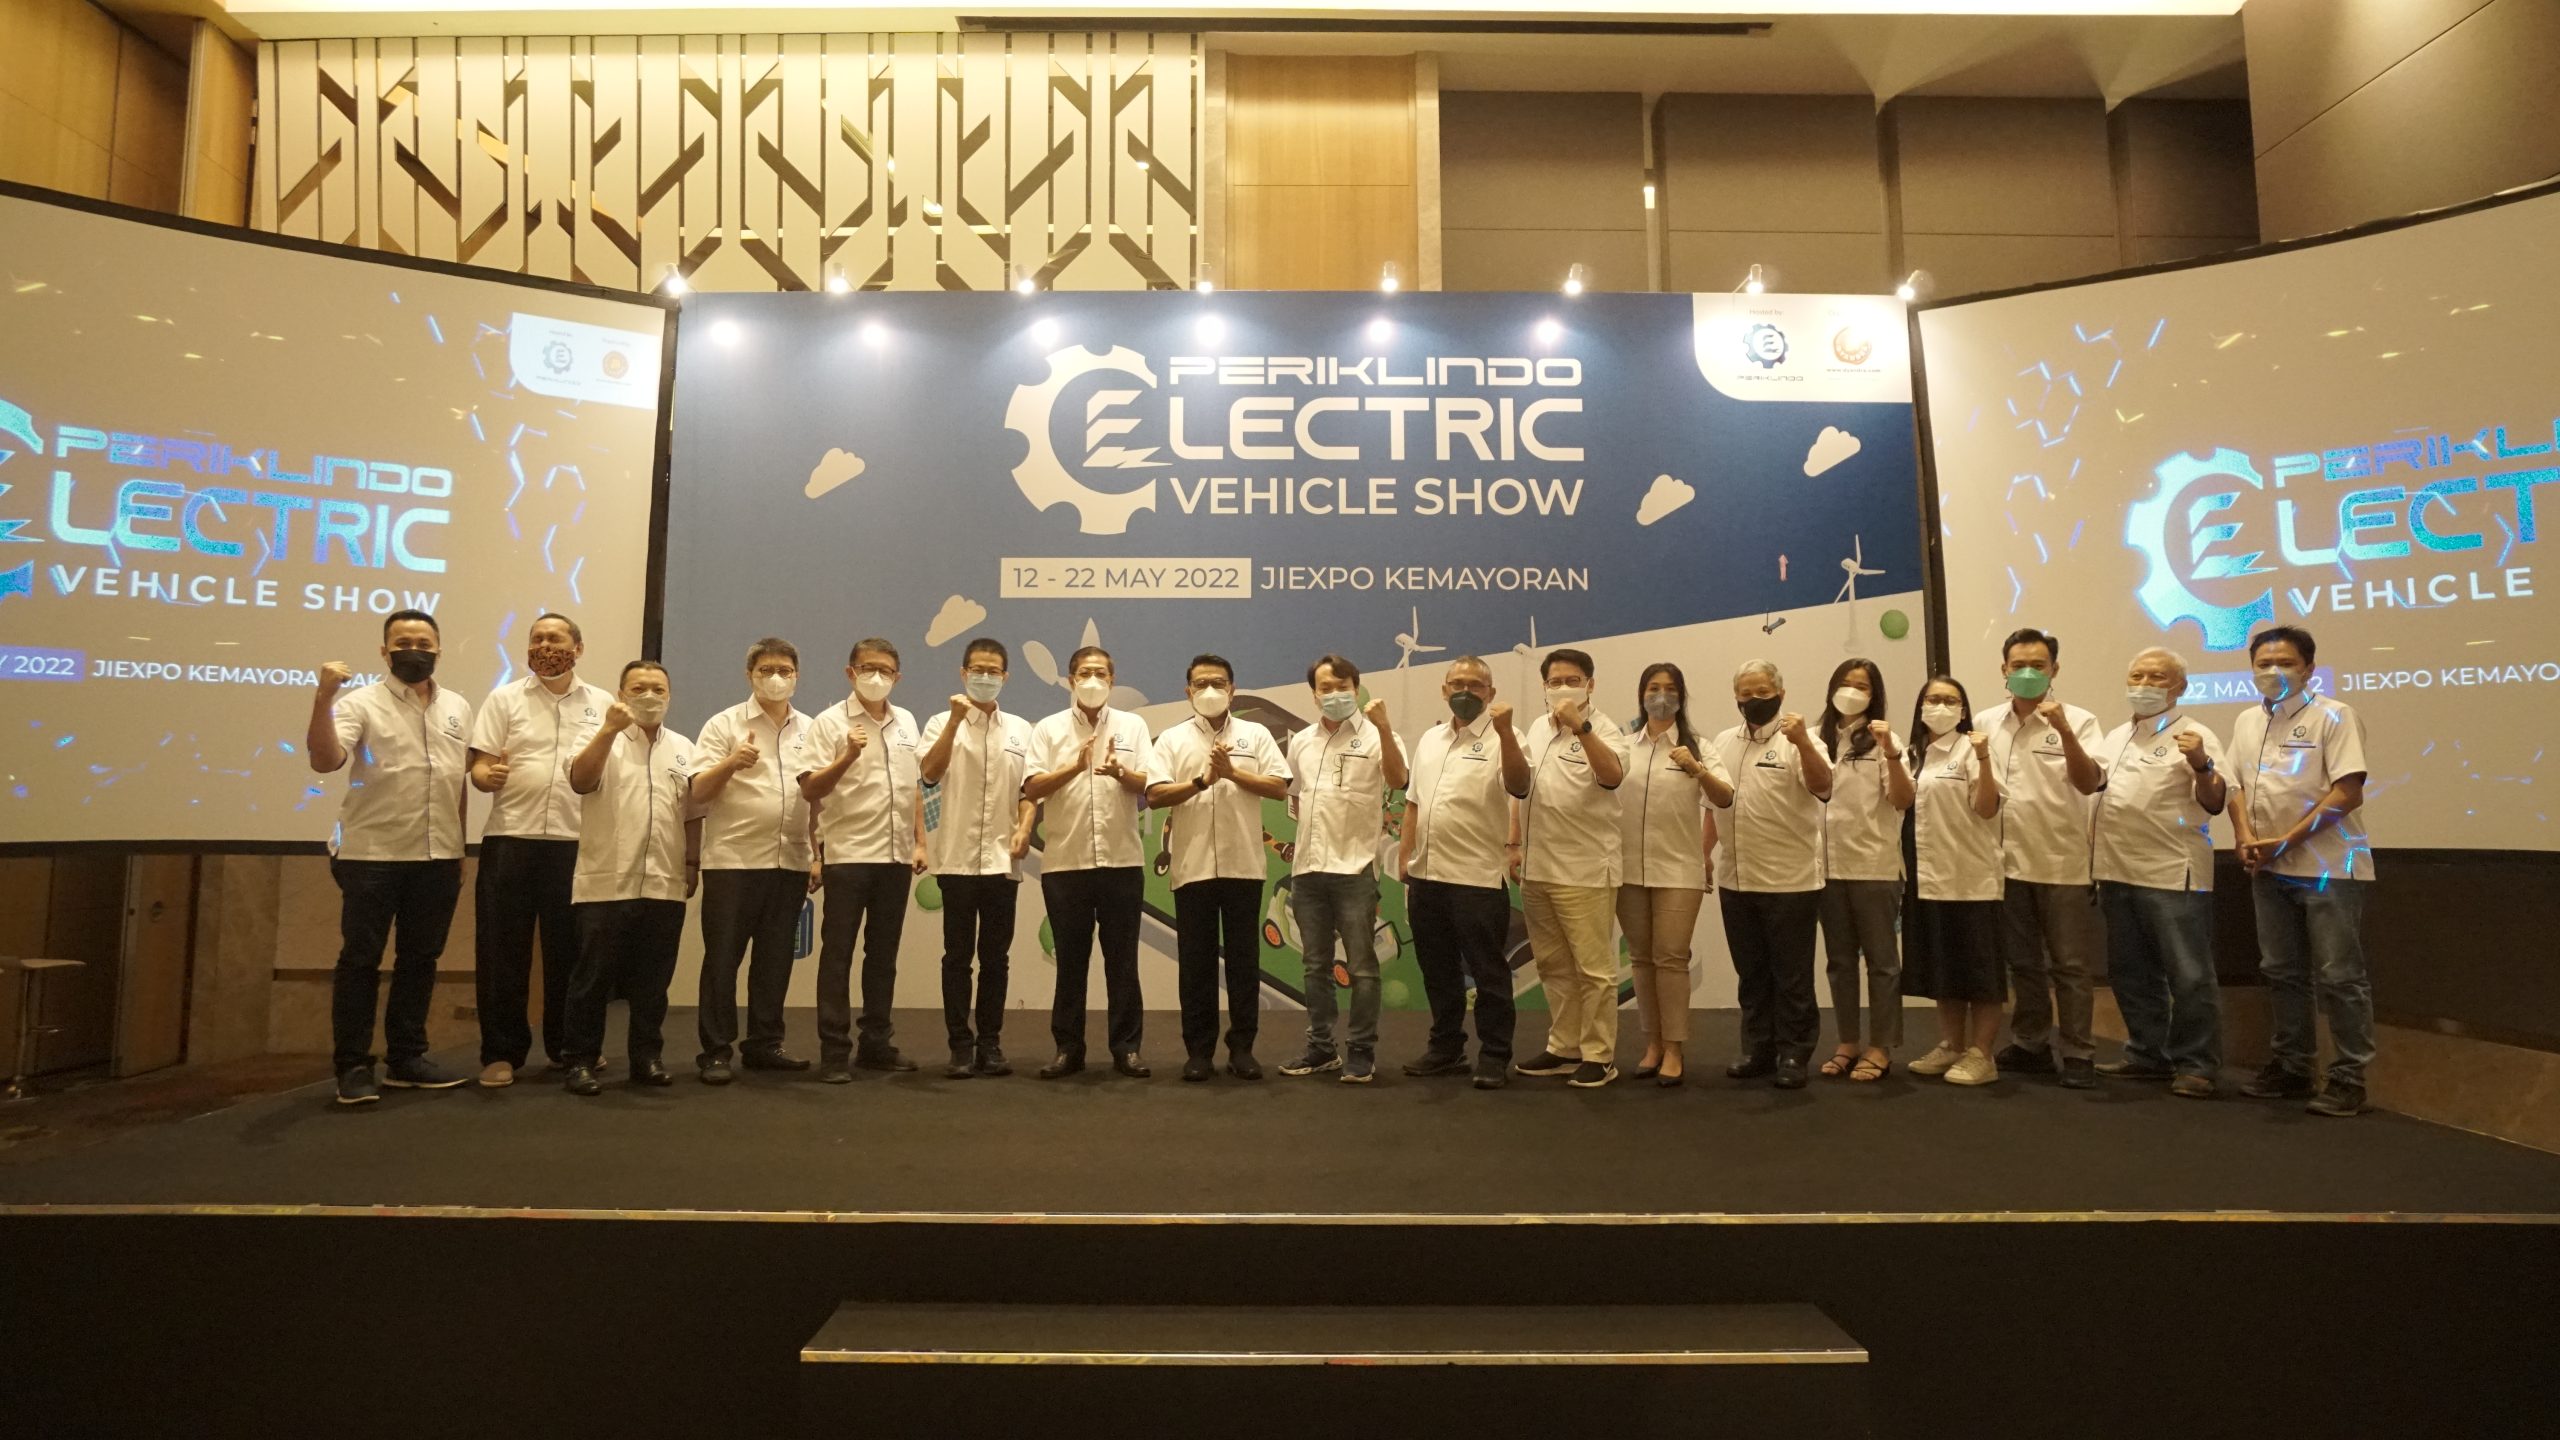 Launching Periklindo Electric Vehicle Show (PEVS) 2022